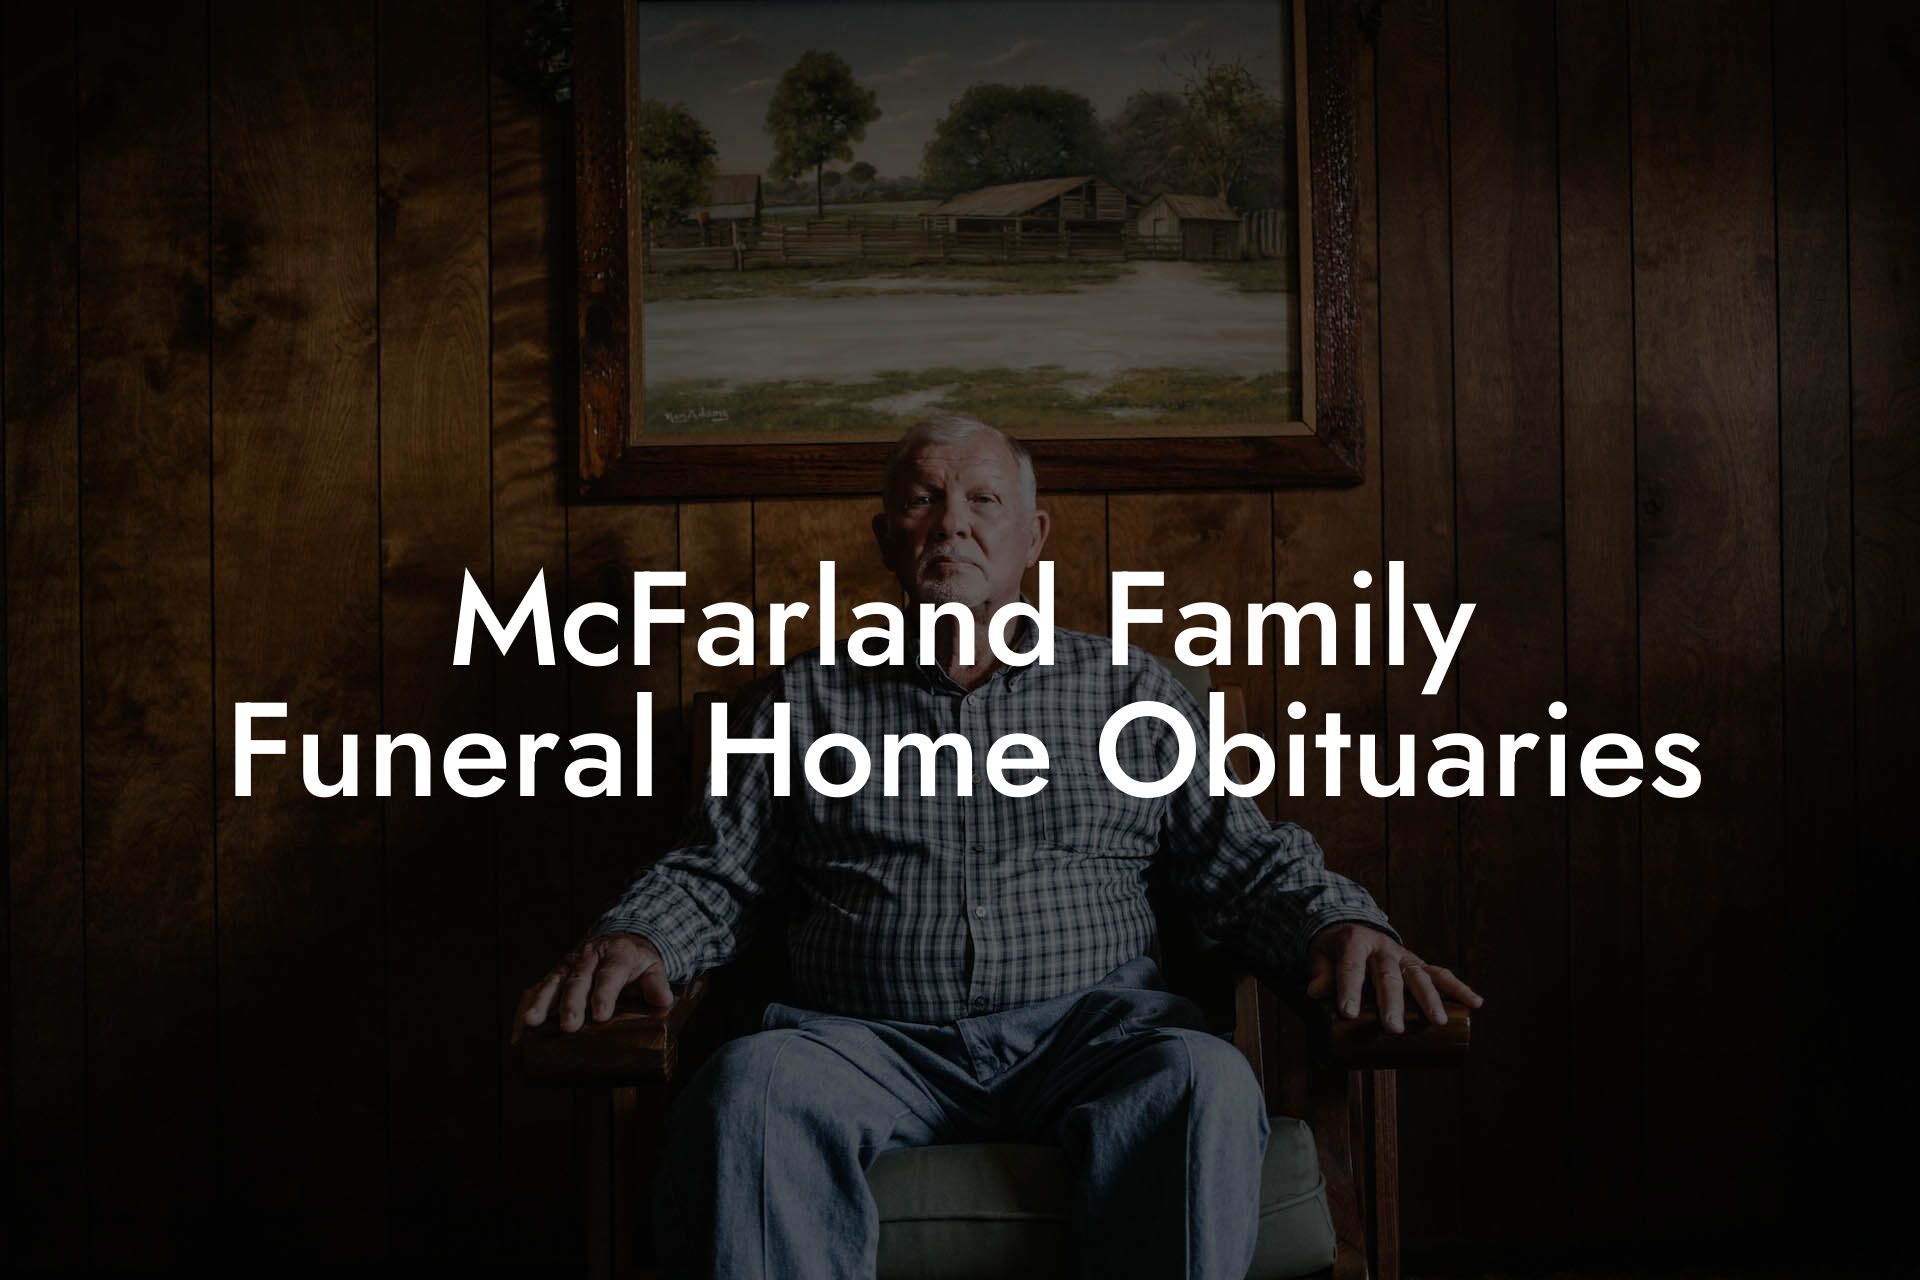 McFarland Family Funeral Home Obituaries